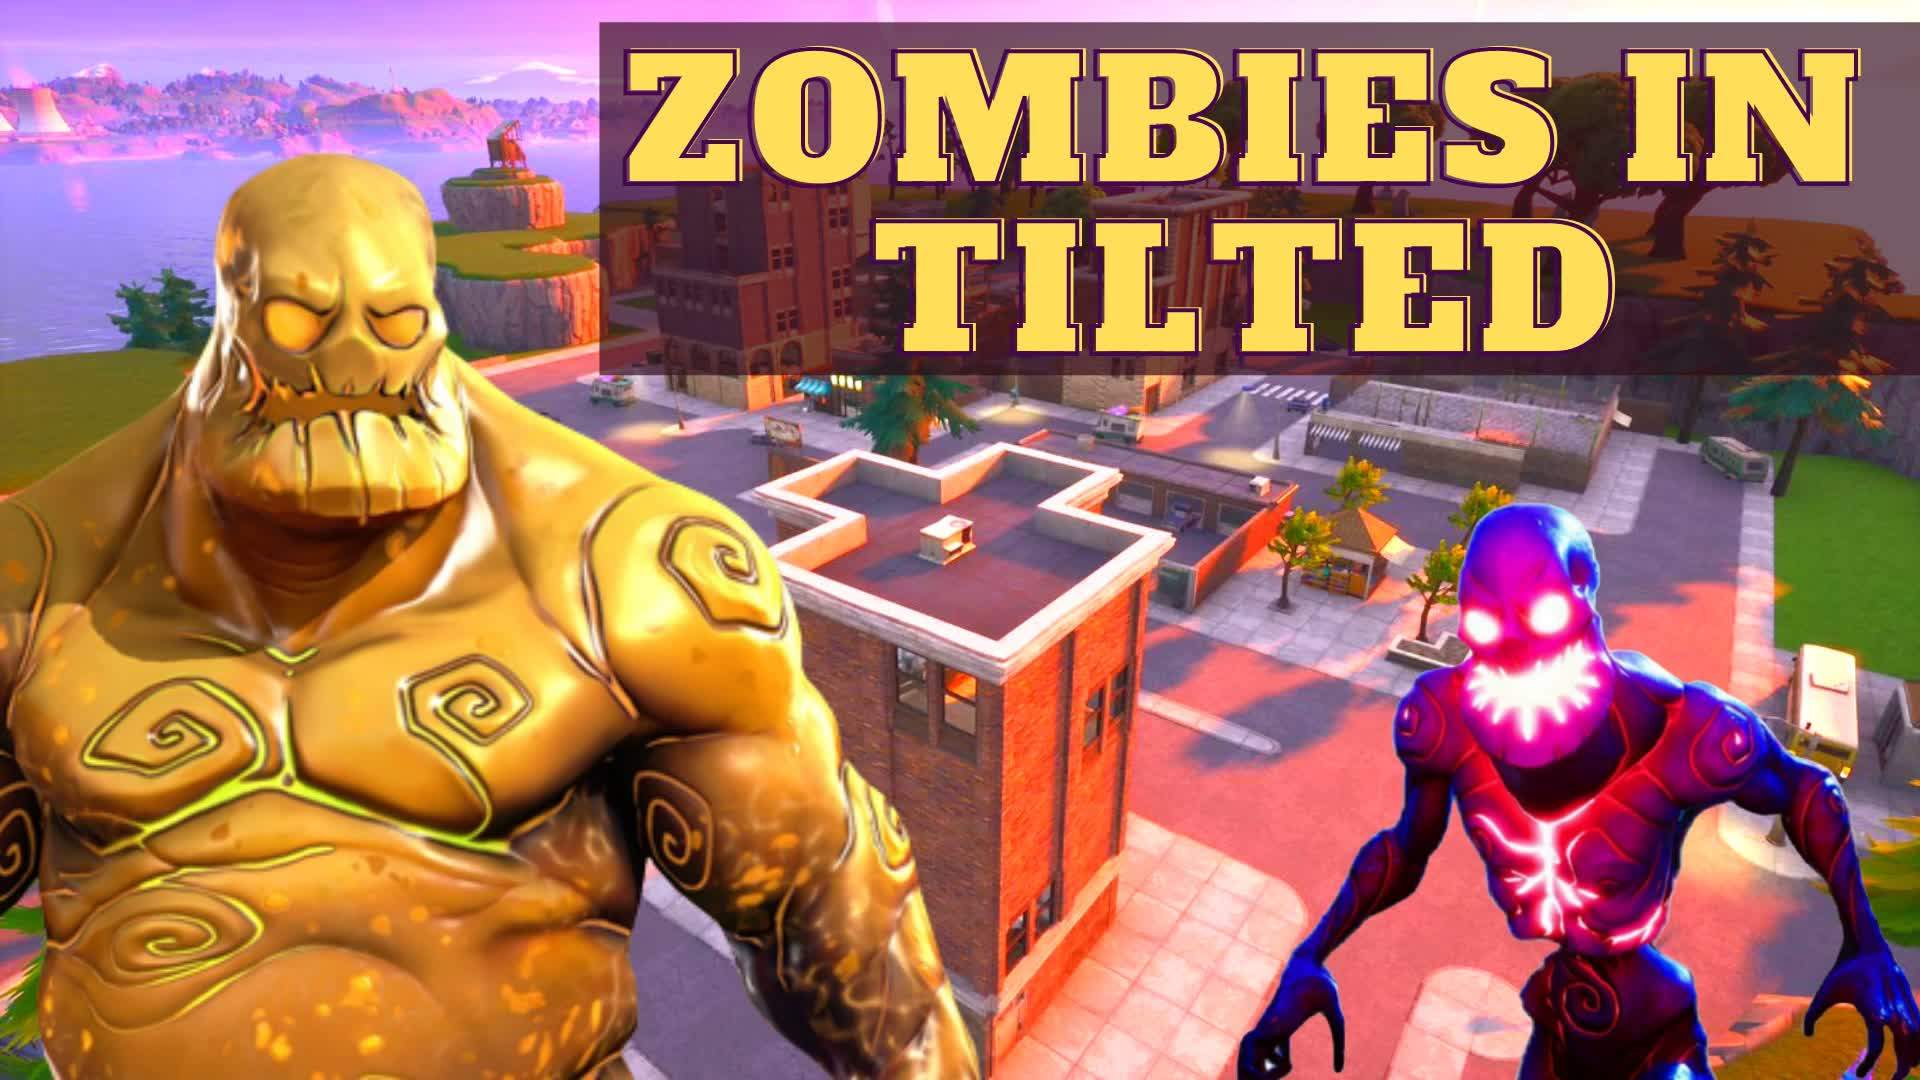 ZOMBIES IN TILTED TOWERS!